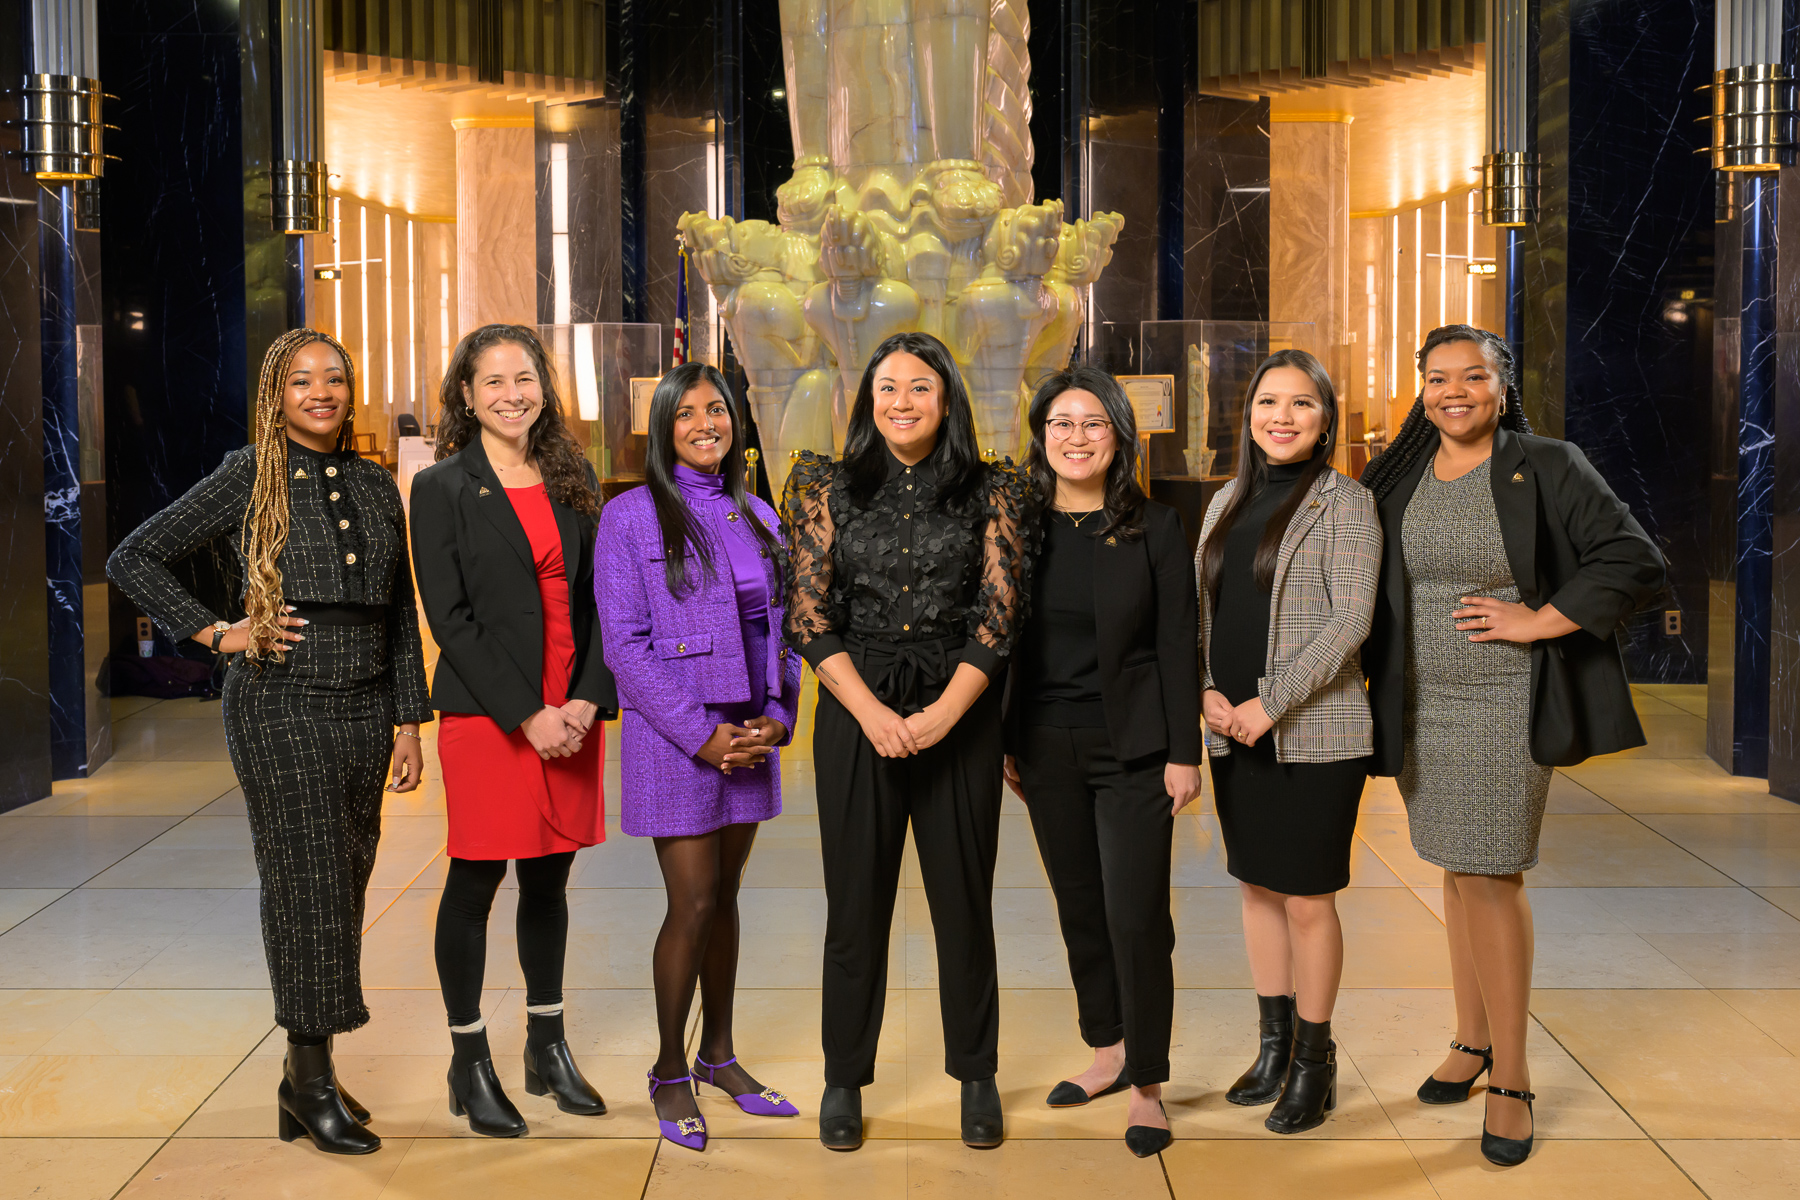 The 2024 Saint Paul City Council stands for a photo in the atrium of City Hall. From left, in order of ward 1 through 7: Anika Bowie, Rebecca Noecker, Saura Jost, Mitra Jalali, HwaJeong Kim, Nelsie Yang, and Cheniqua Johnson. Photo credit: Rich Ryan.